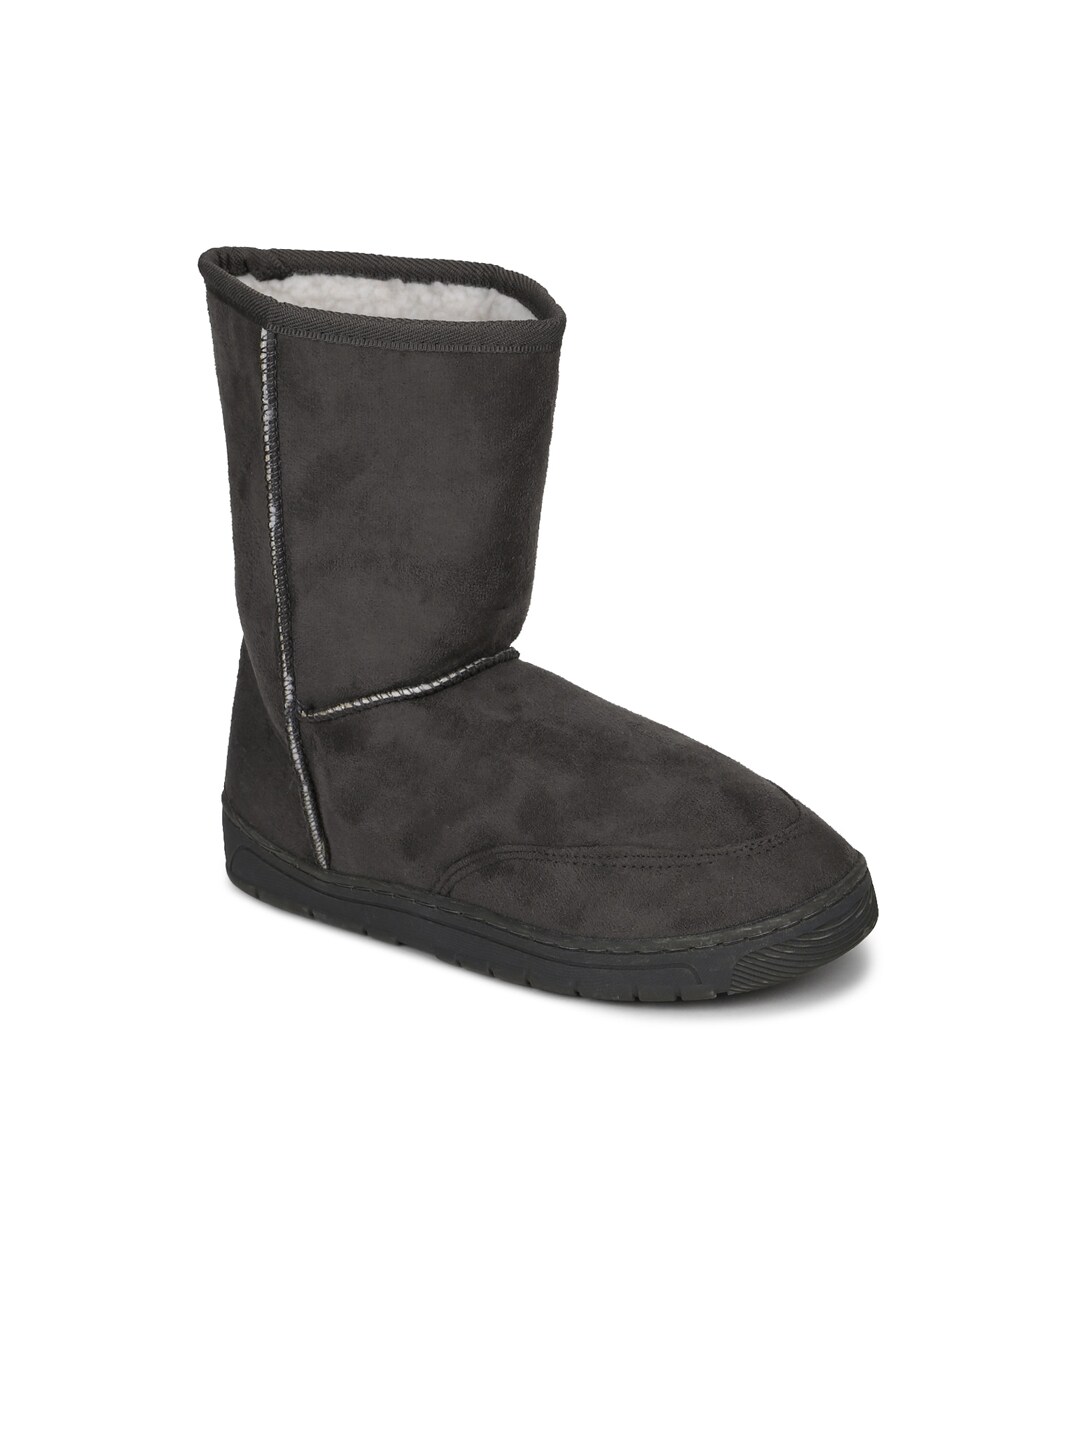 Truffle Collection Charcoal Suede Flatform Heeled Boots Price in India